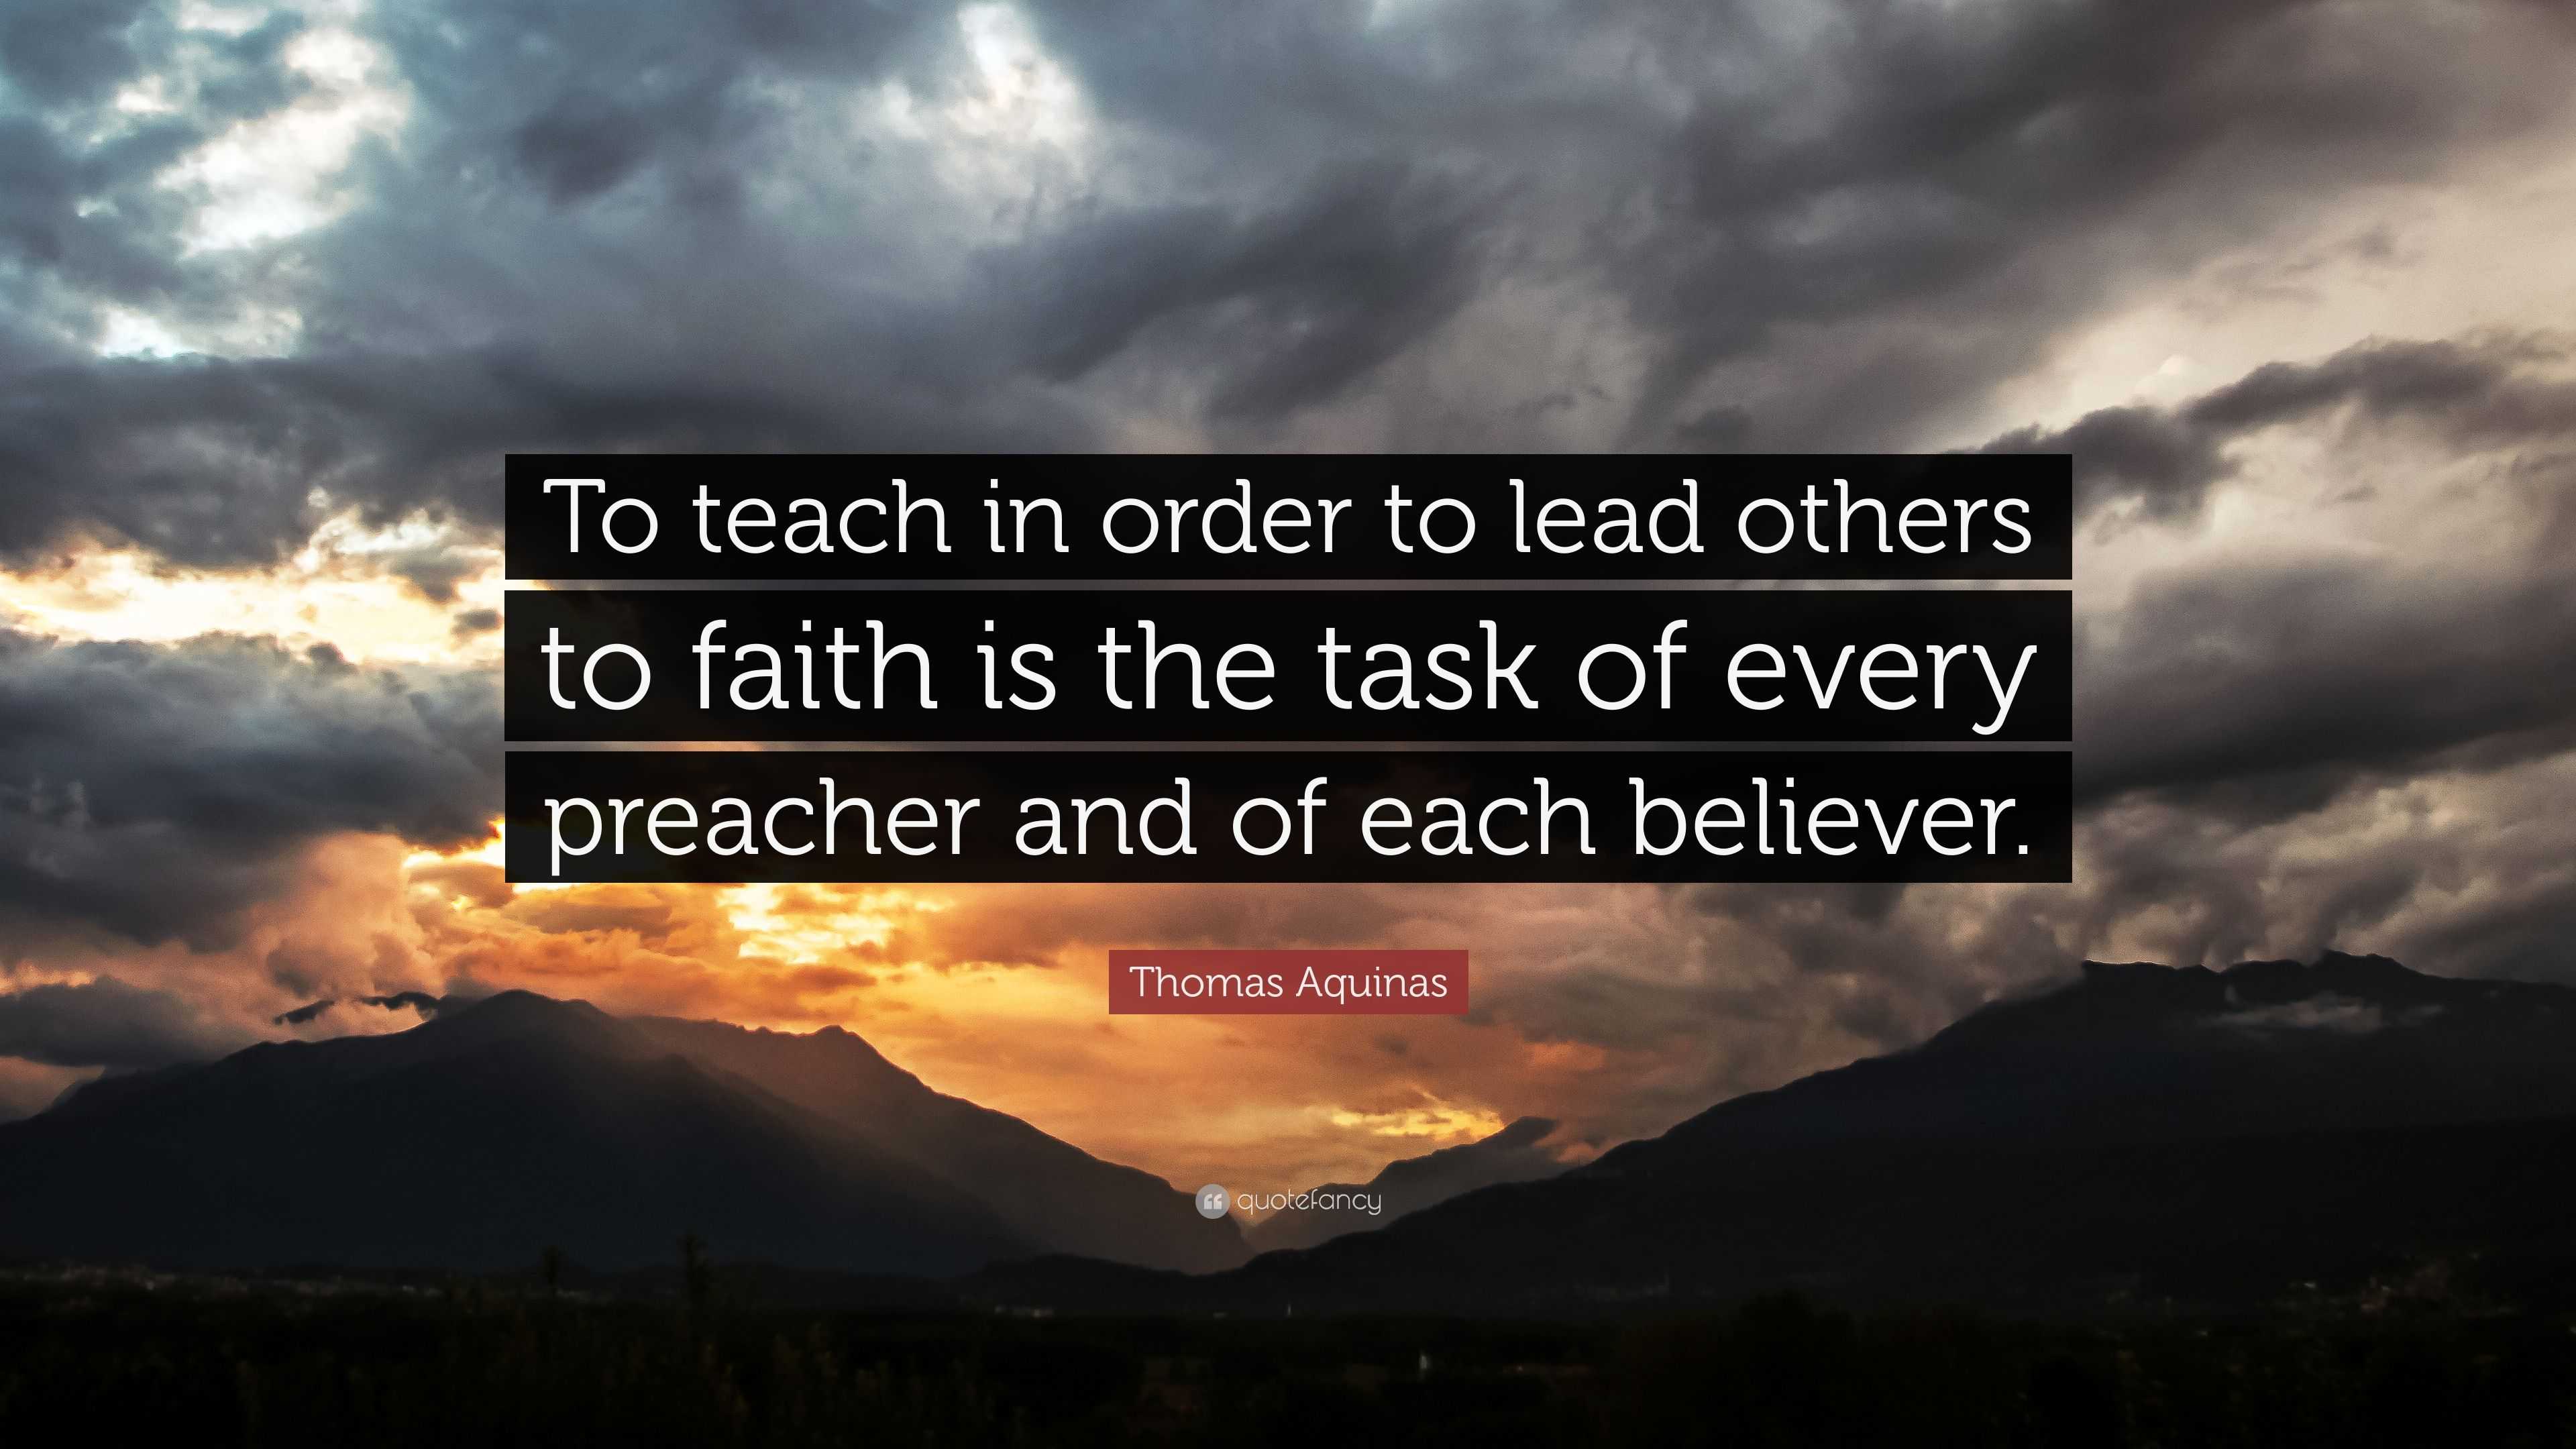 Thomas Aquinas Quote: “To Teach In Order To Lead Others To Faith Is The Task Of